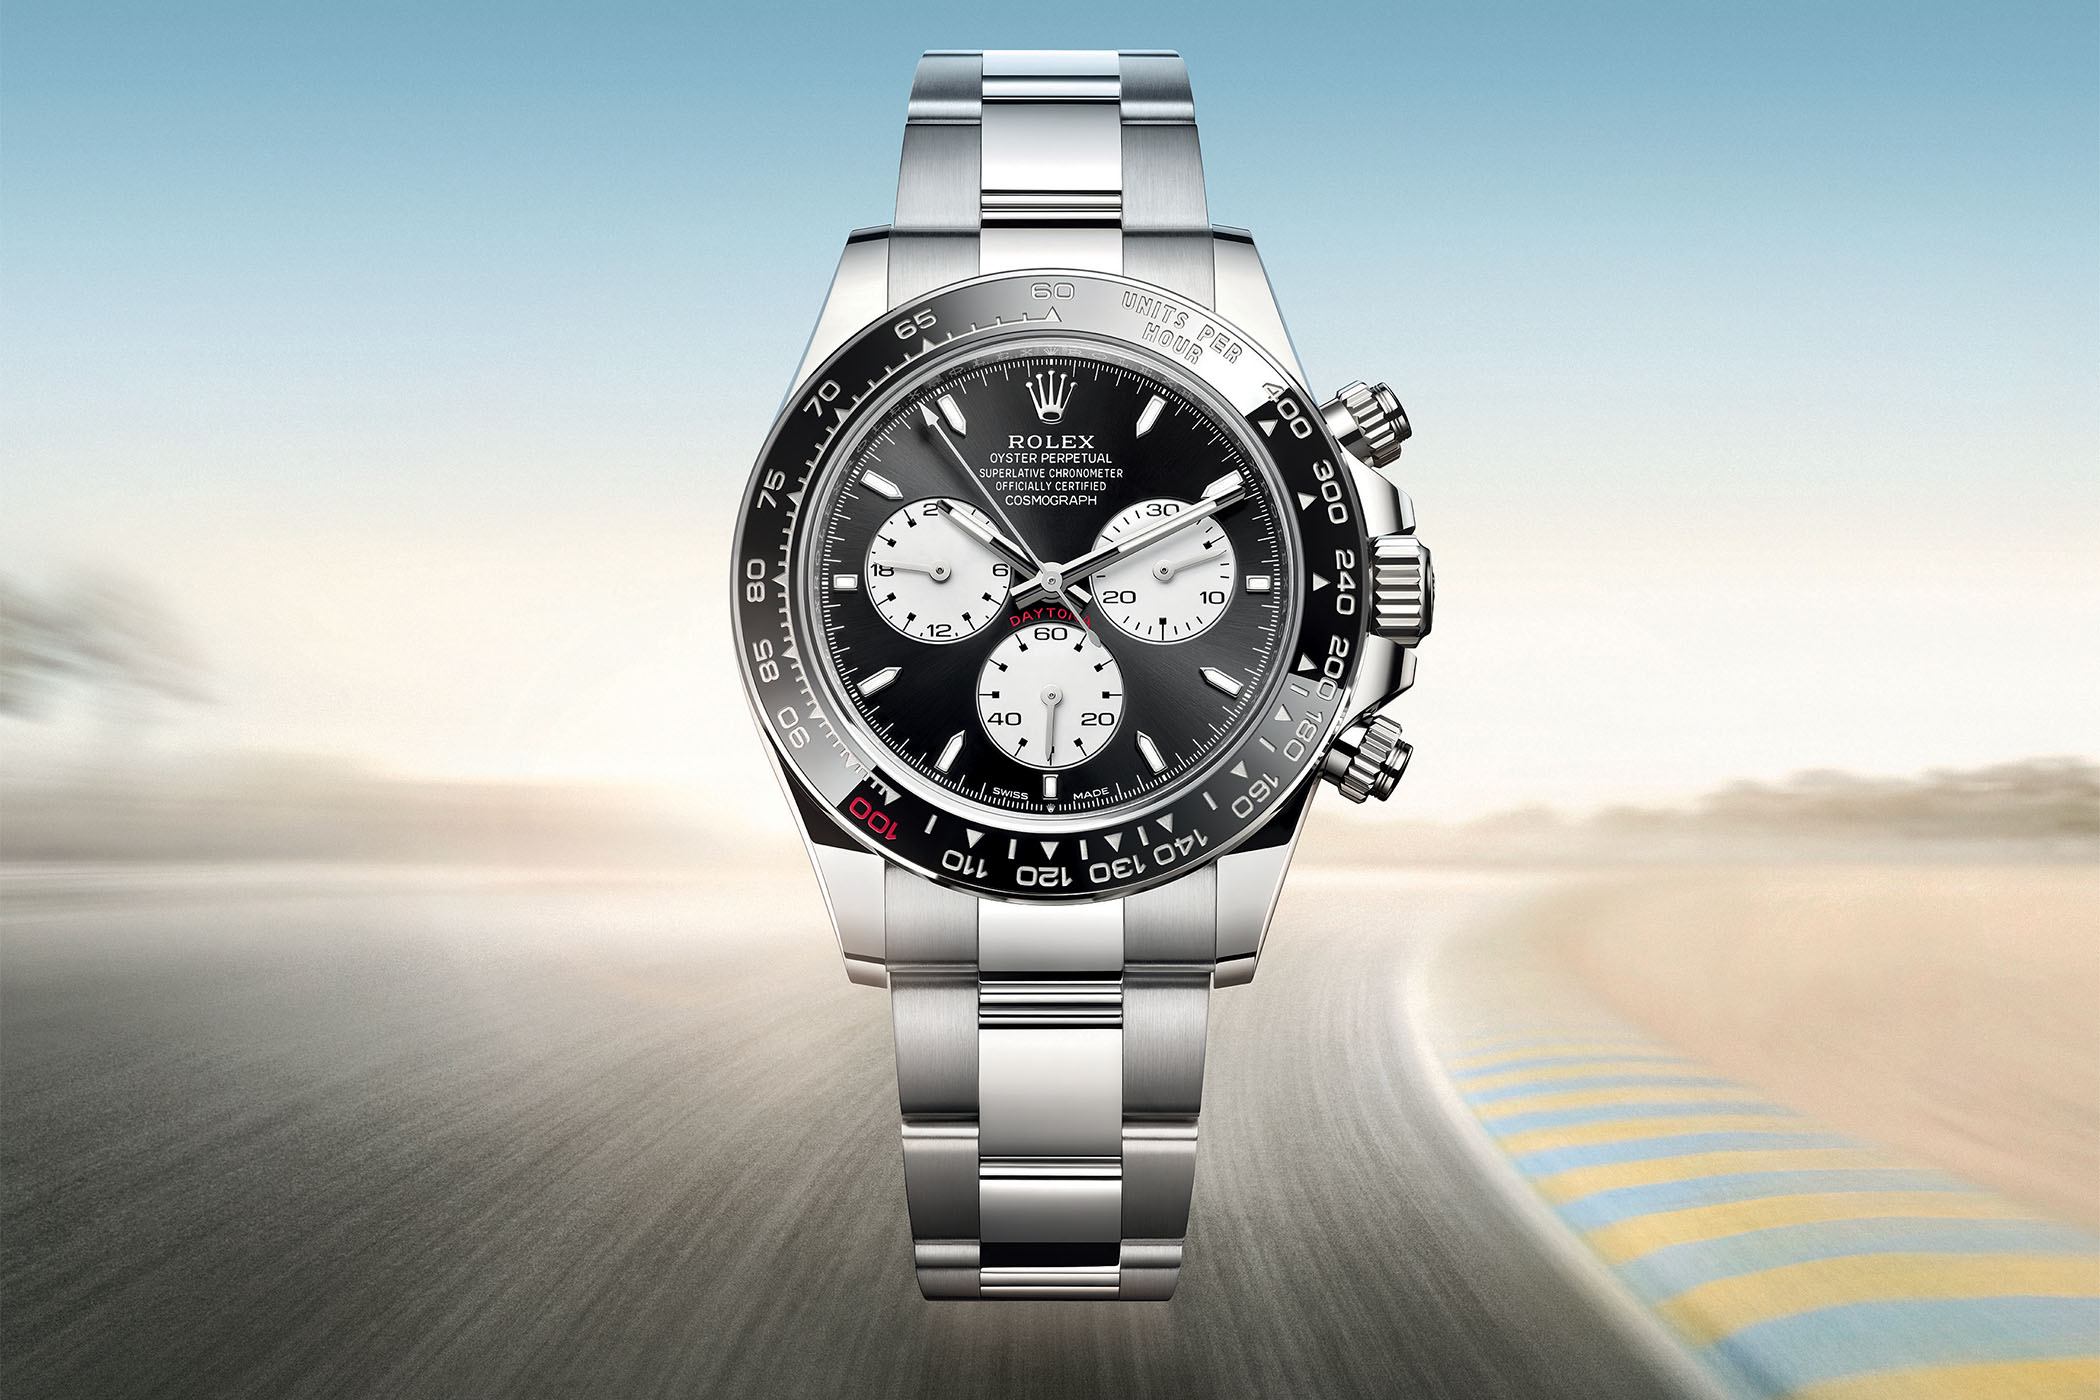 At regere Belyse på en ferie Exclusive: The New Rolex Cosmograph Daytona 126529LN, With Paul  Newman-Inspired Dial